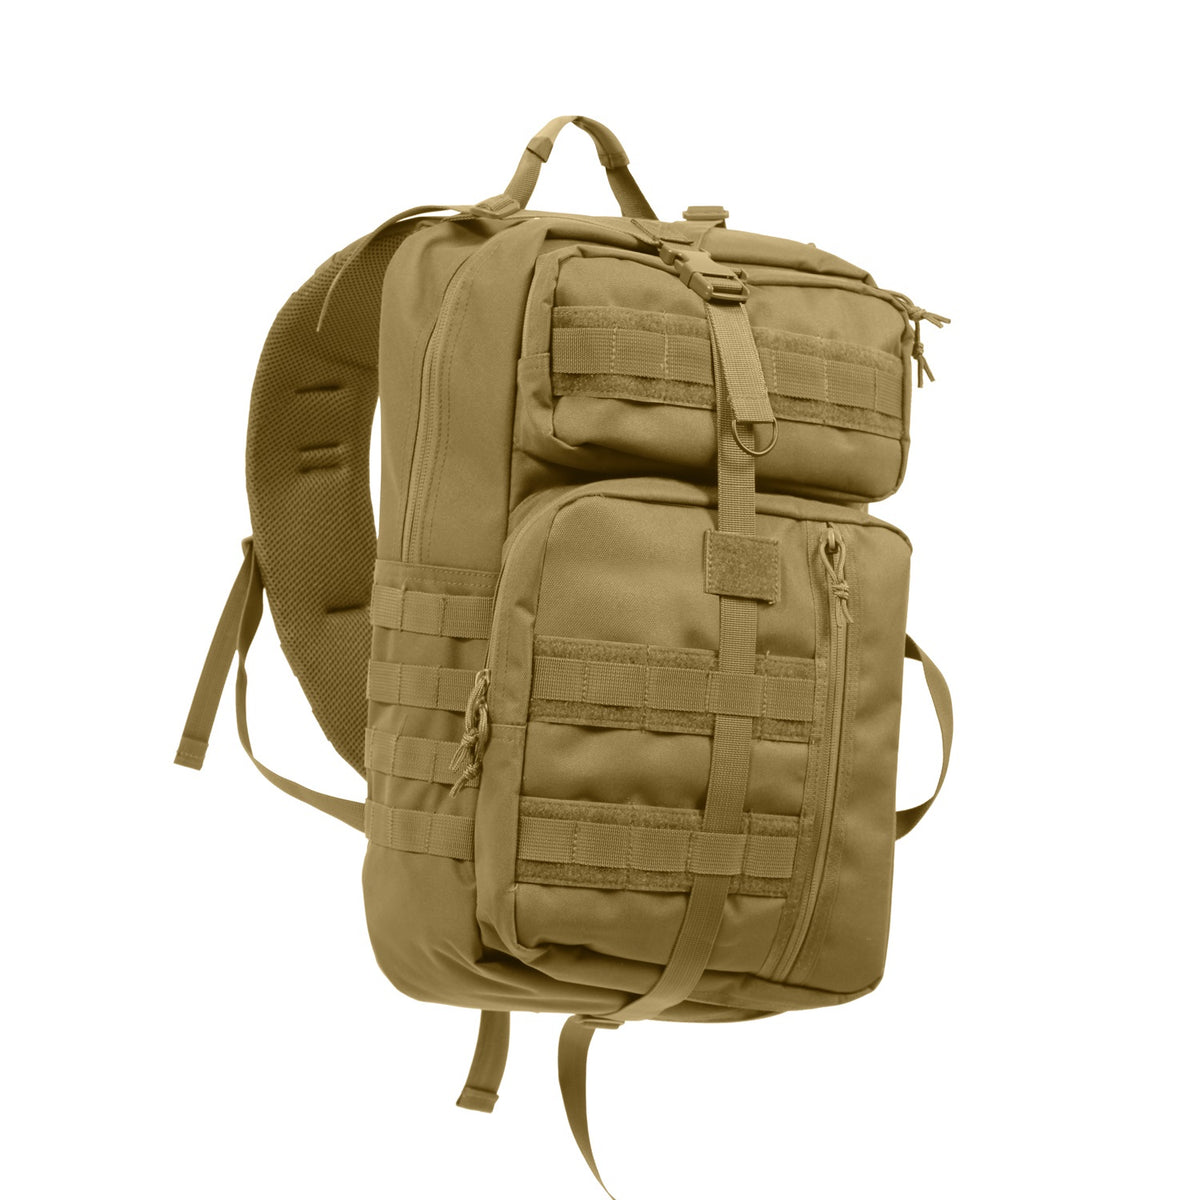 Rothco Tactisling Transport Pack Coyote Brown